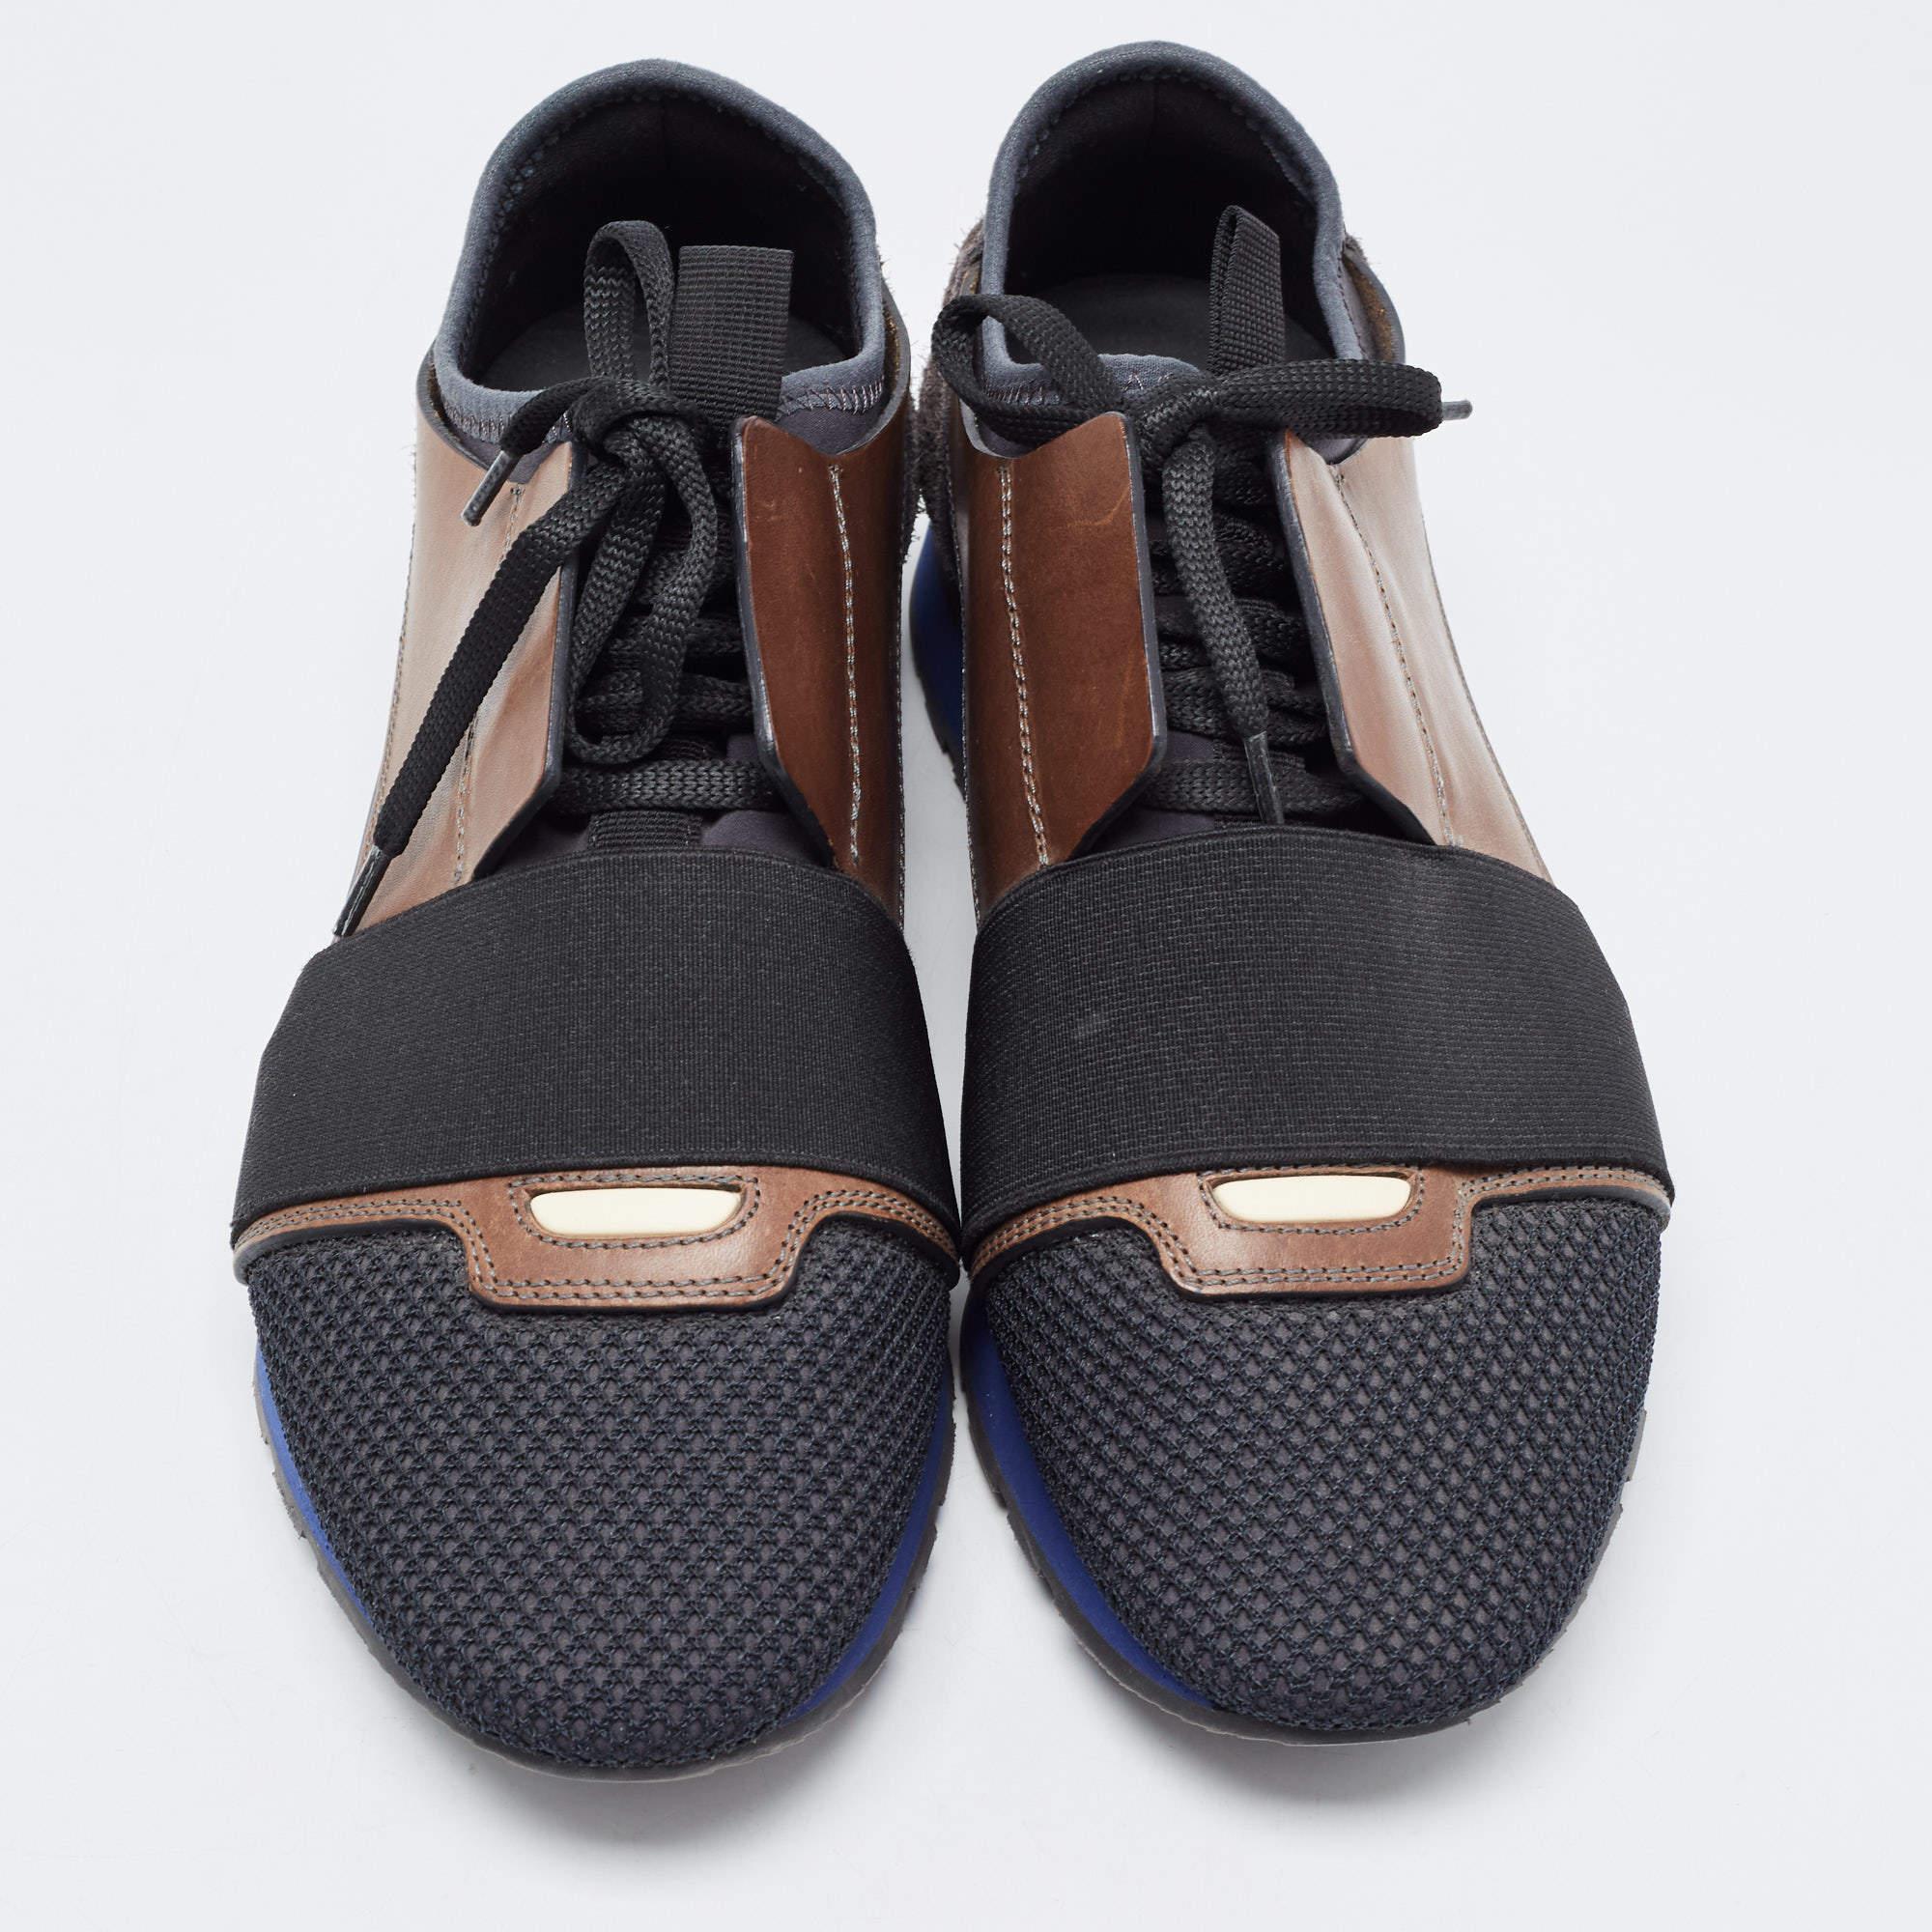 Coming in a classic silhouette, these designer sneakers are a seamless combination of luxury, comfort, and style. These sneakers are finished with signature details and comfortable insoles.

Includes: Original Dustbag